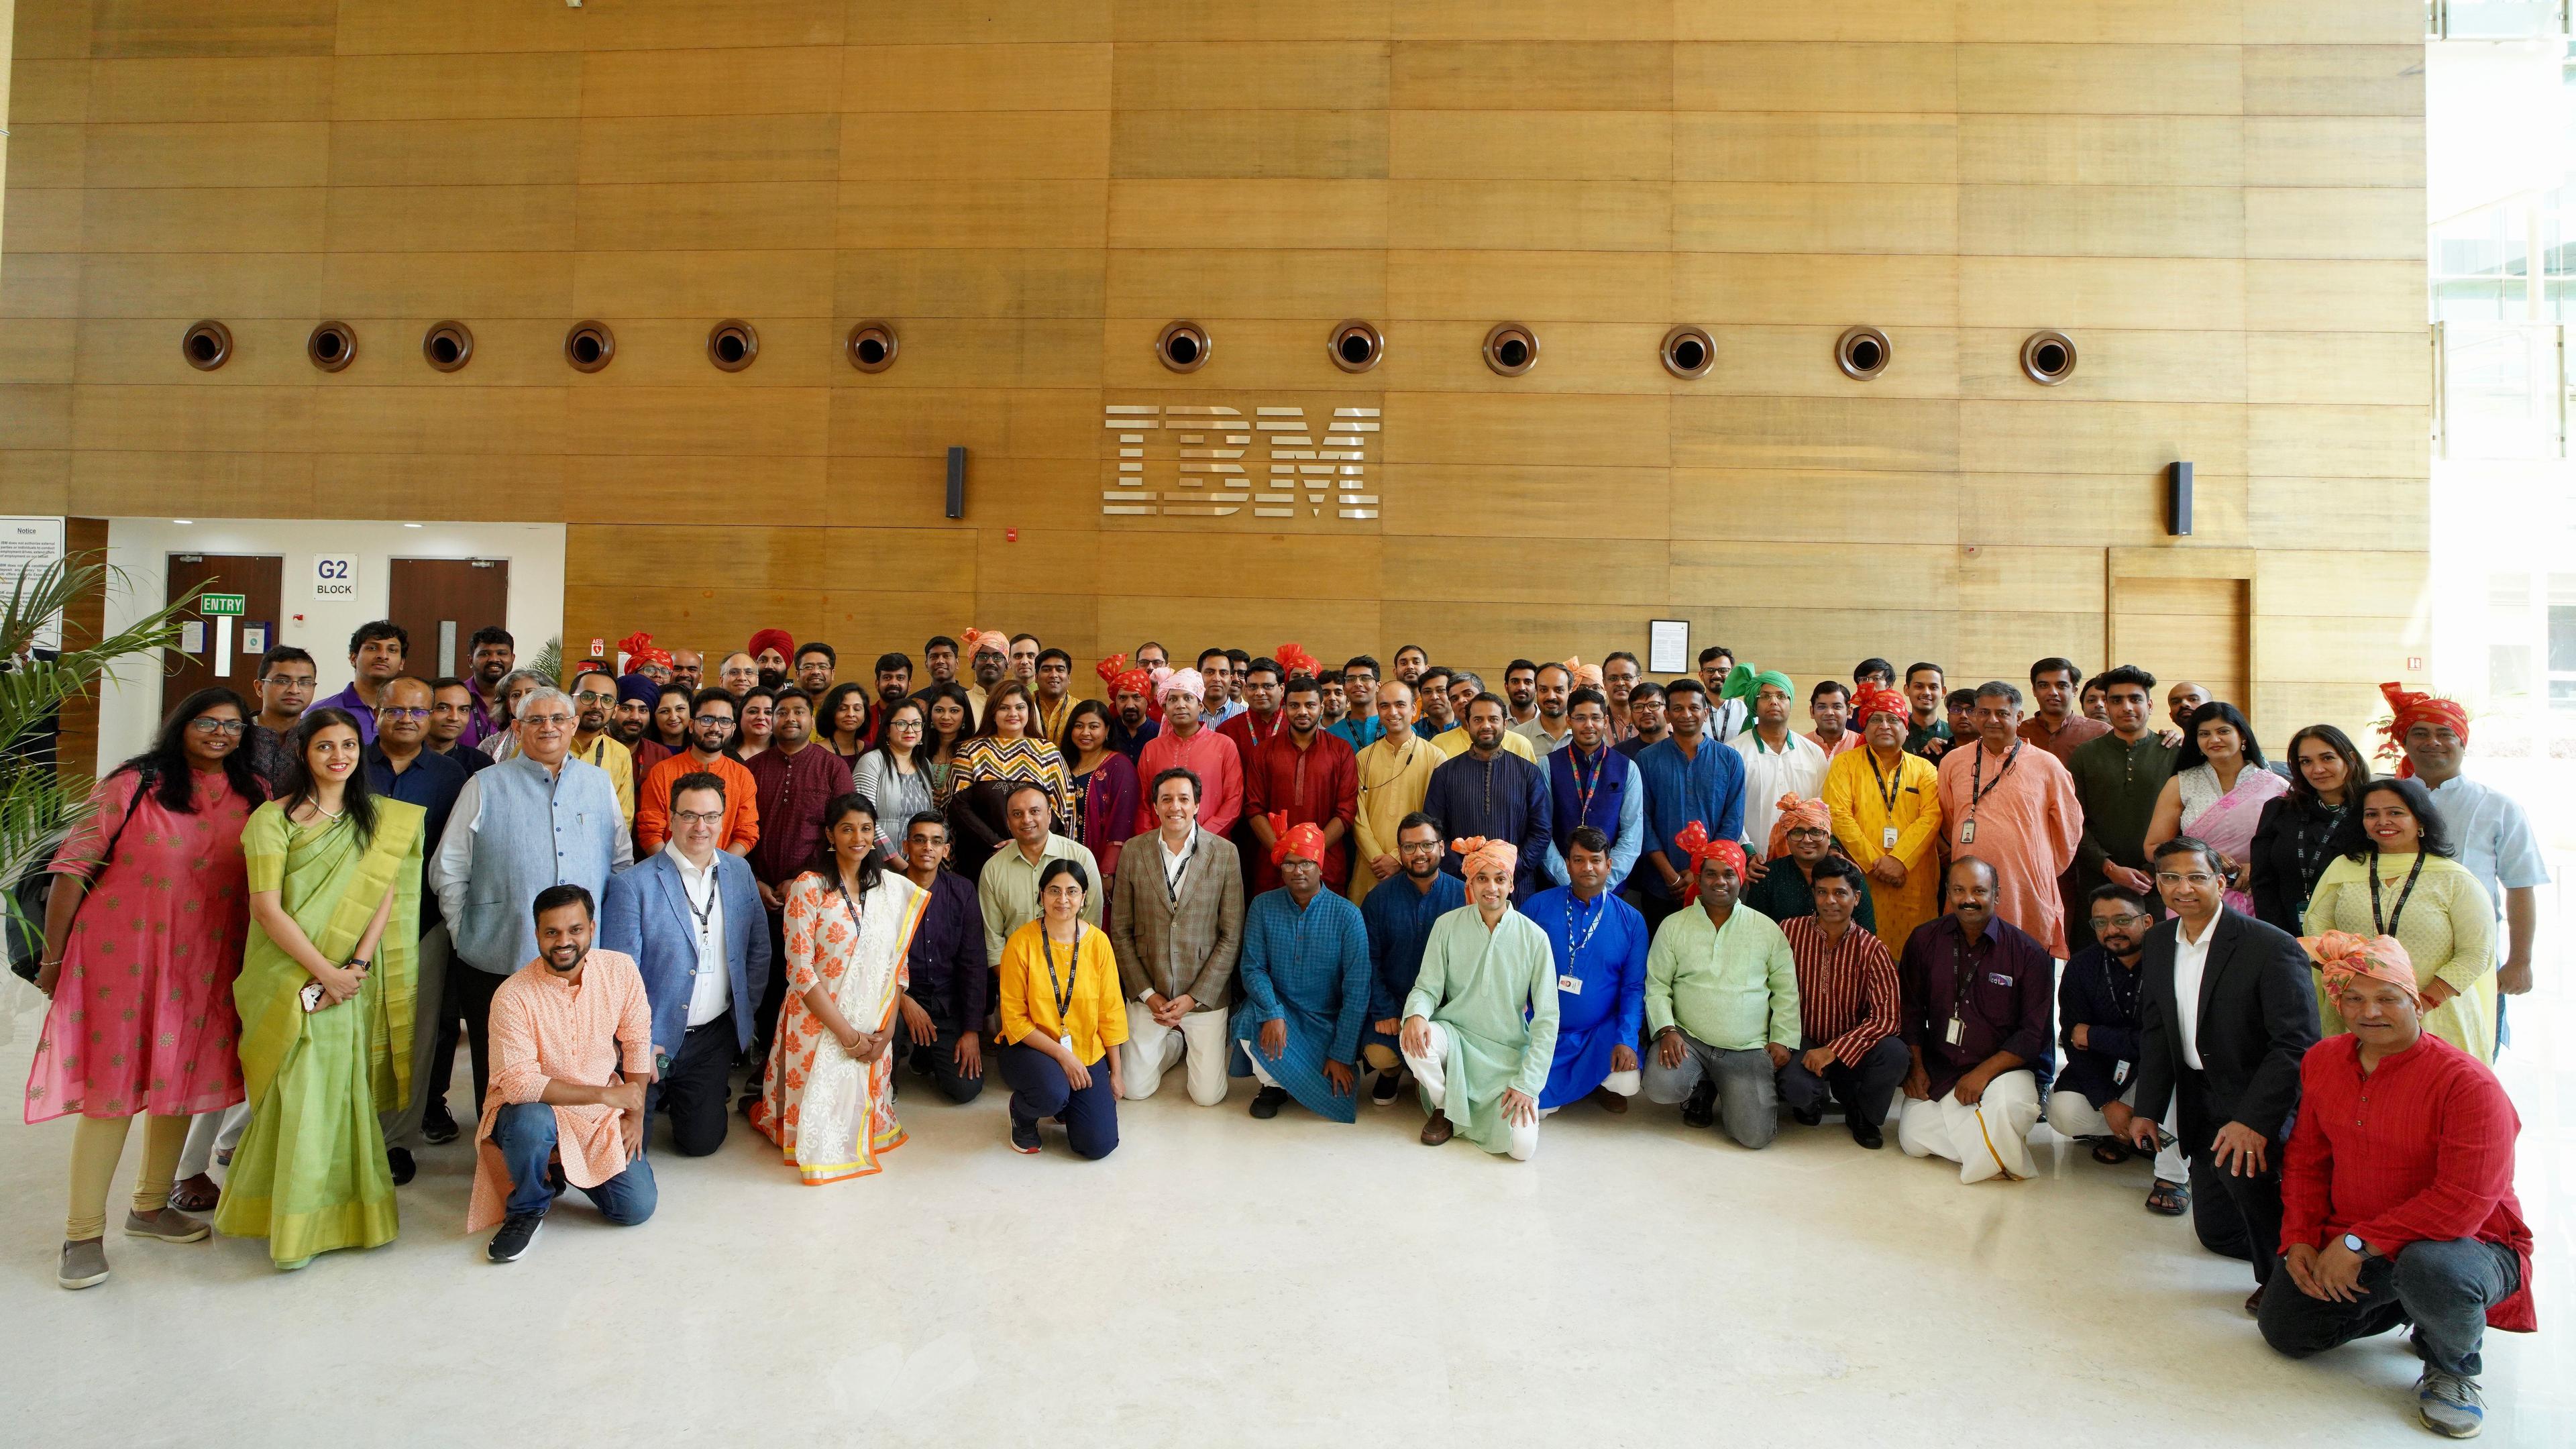 IBM Researchers in India posing in front of an IBM sign.